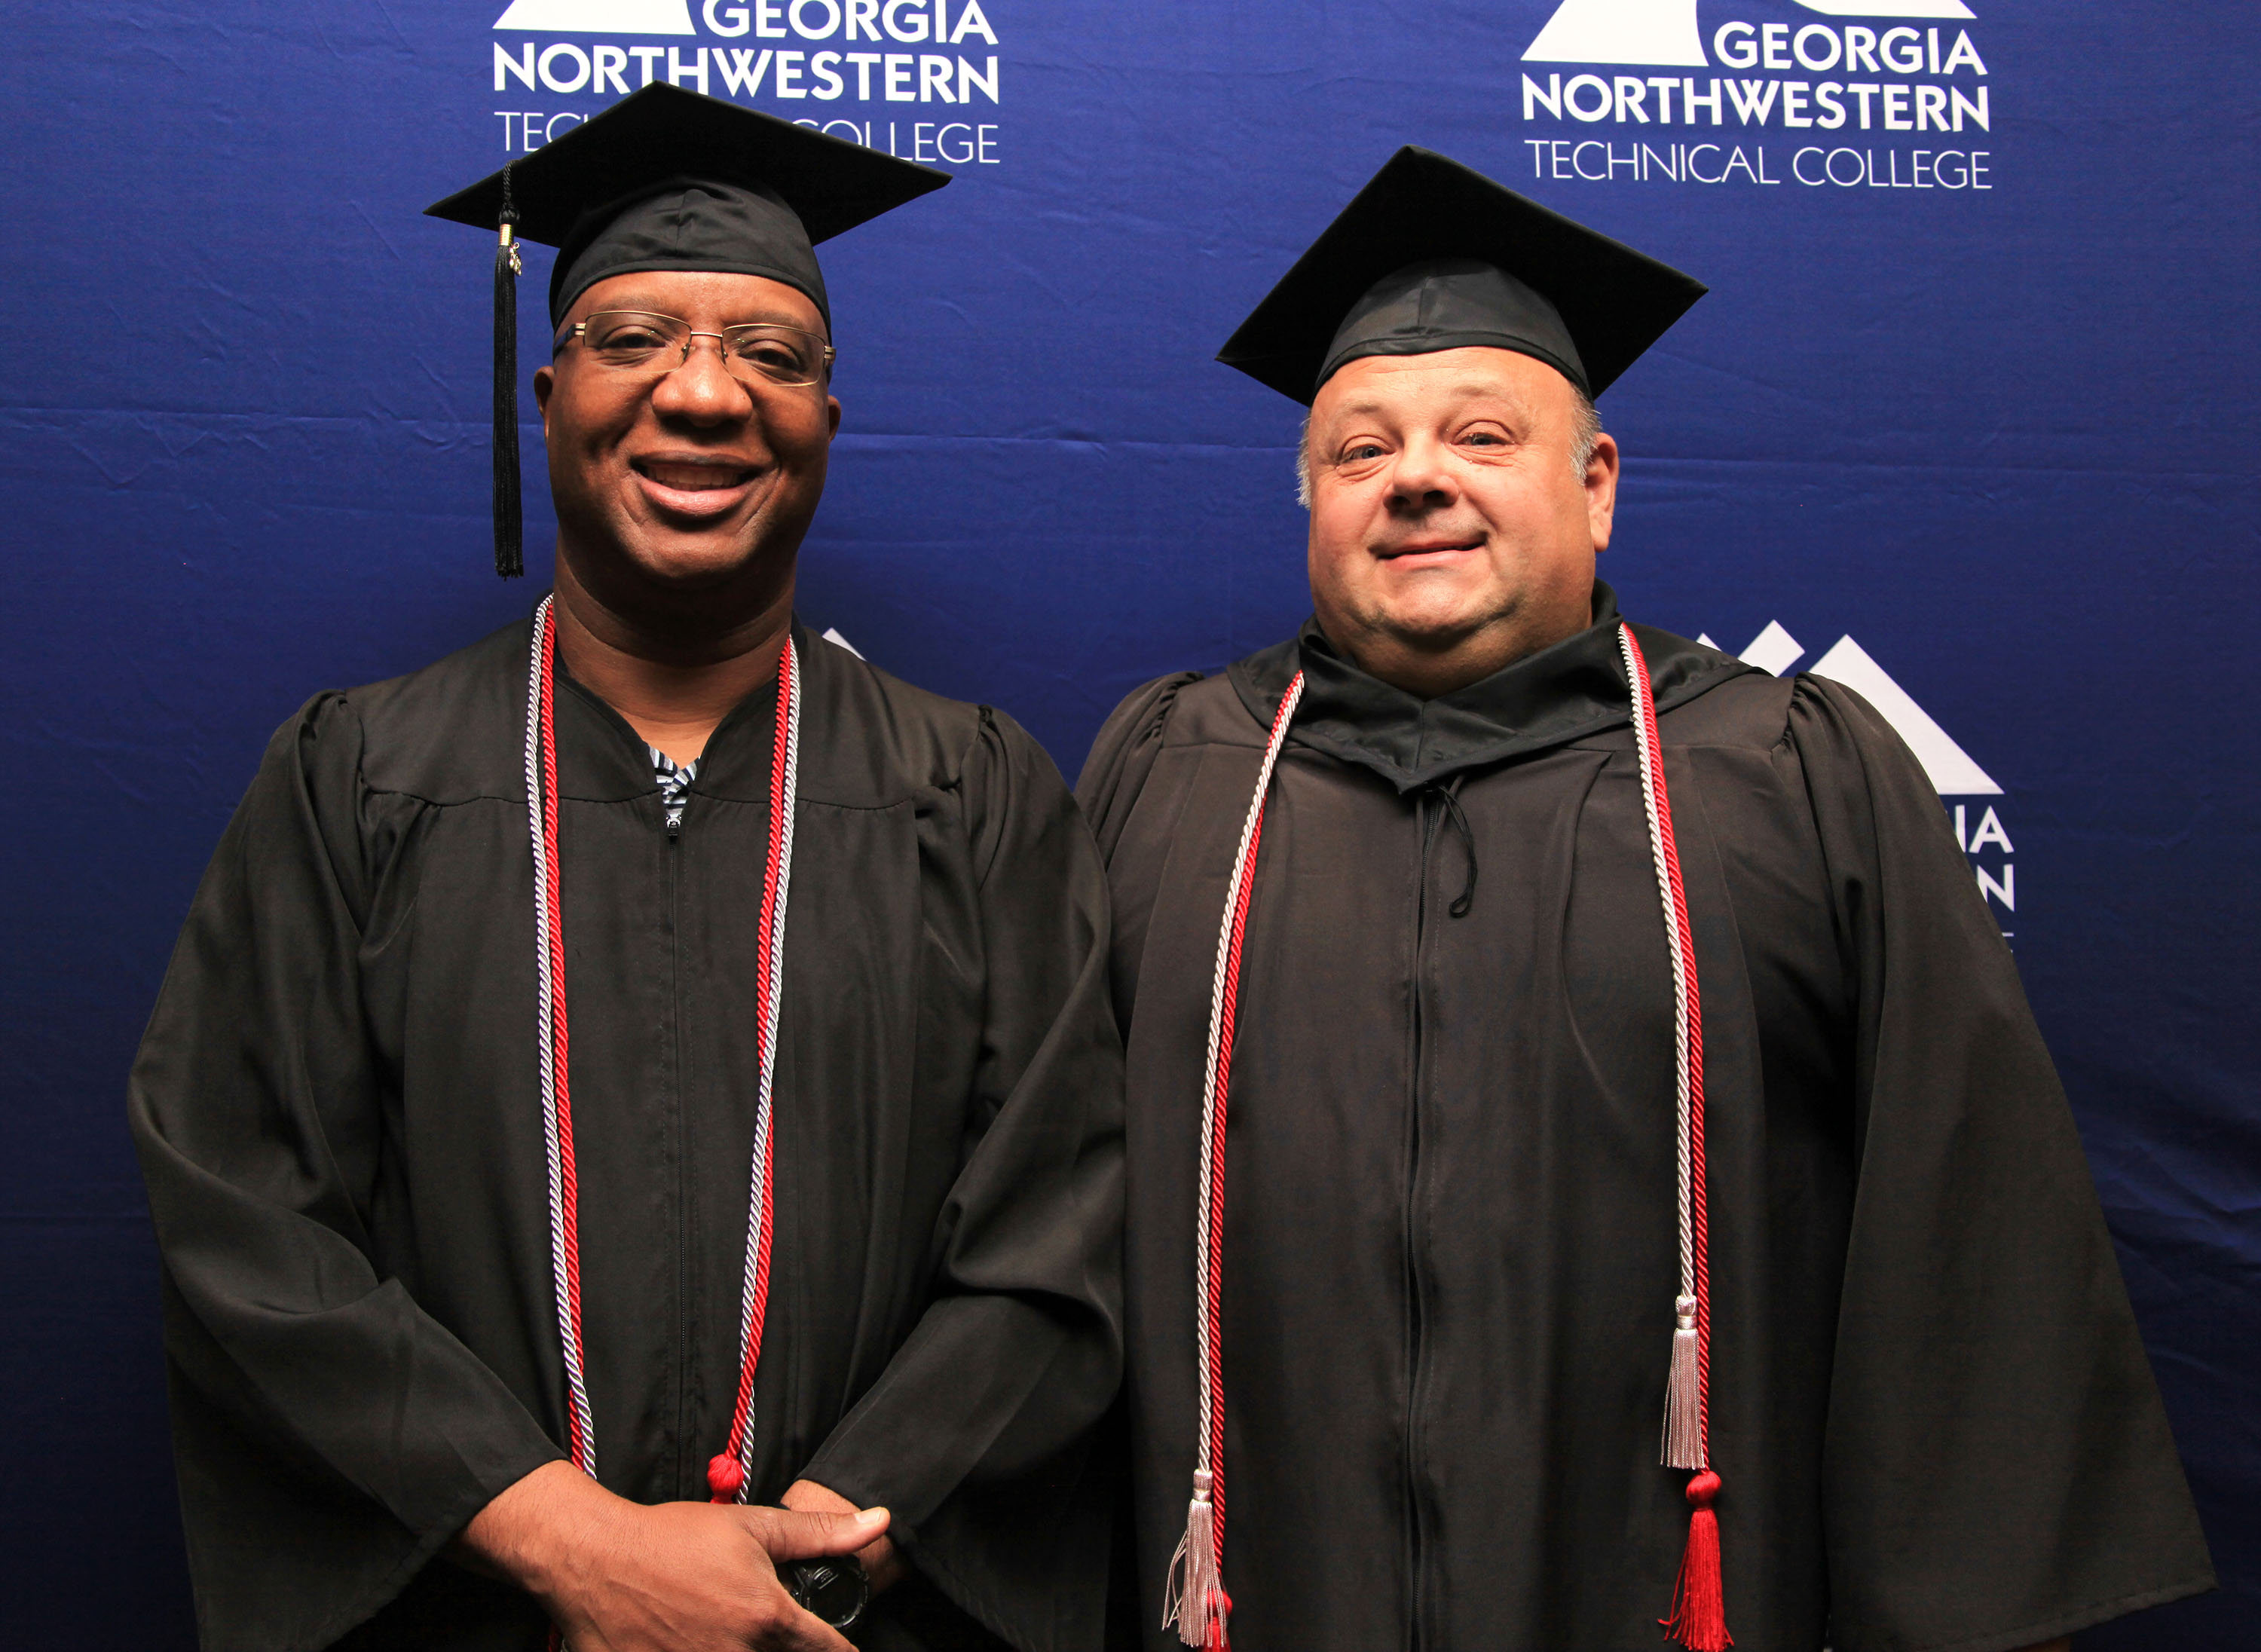 Scottie Carter, program director, assistant dean and instructor of Electrical Systems Technology at GNTC (right),congratulates graduate Ethron “Carl” Crawford at the Fall Commencement Ceremony.